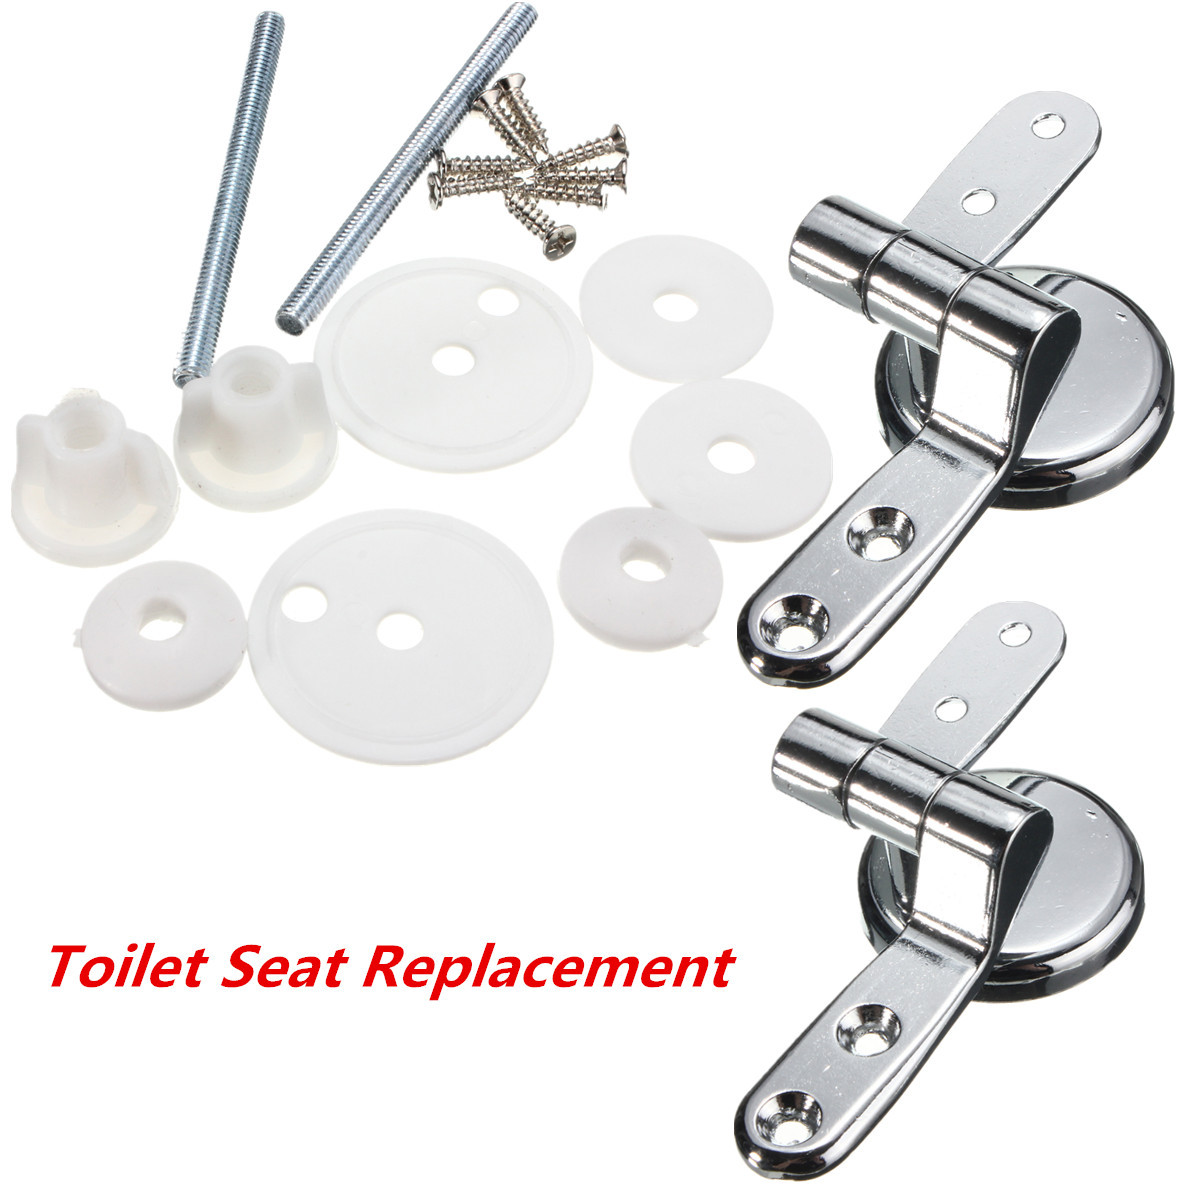 Are Toilet Seat Fittings Universal